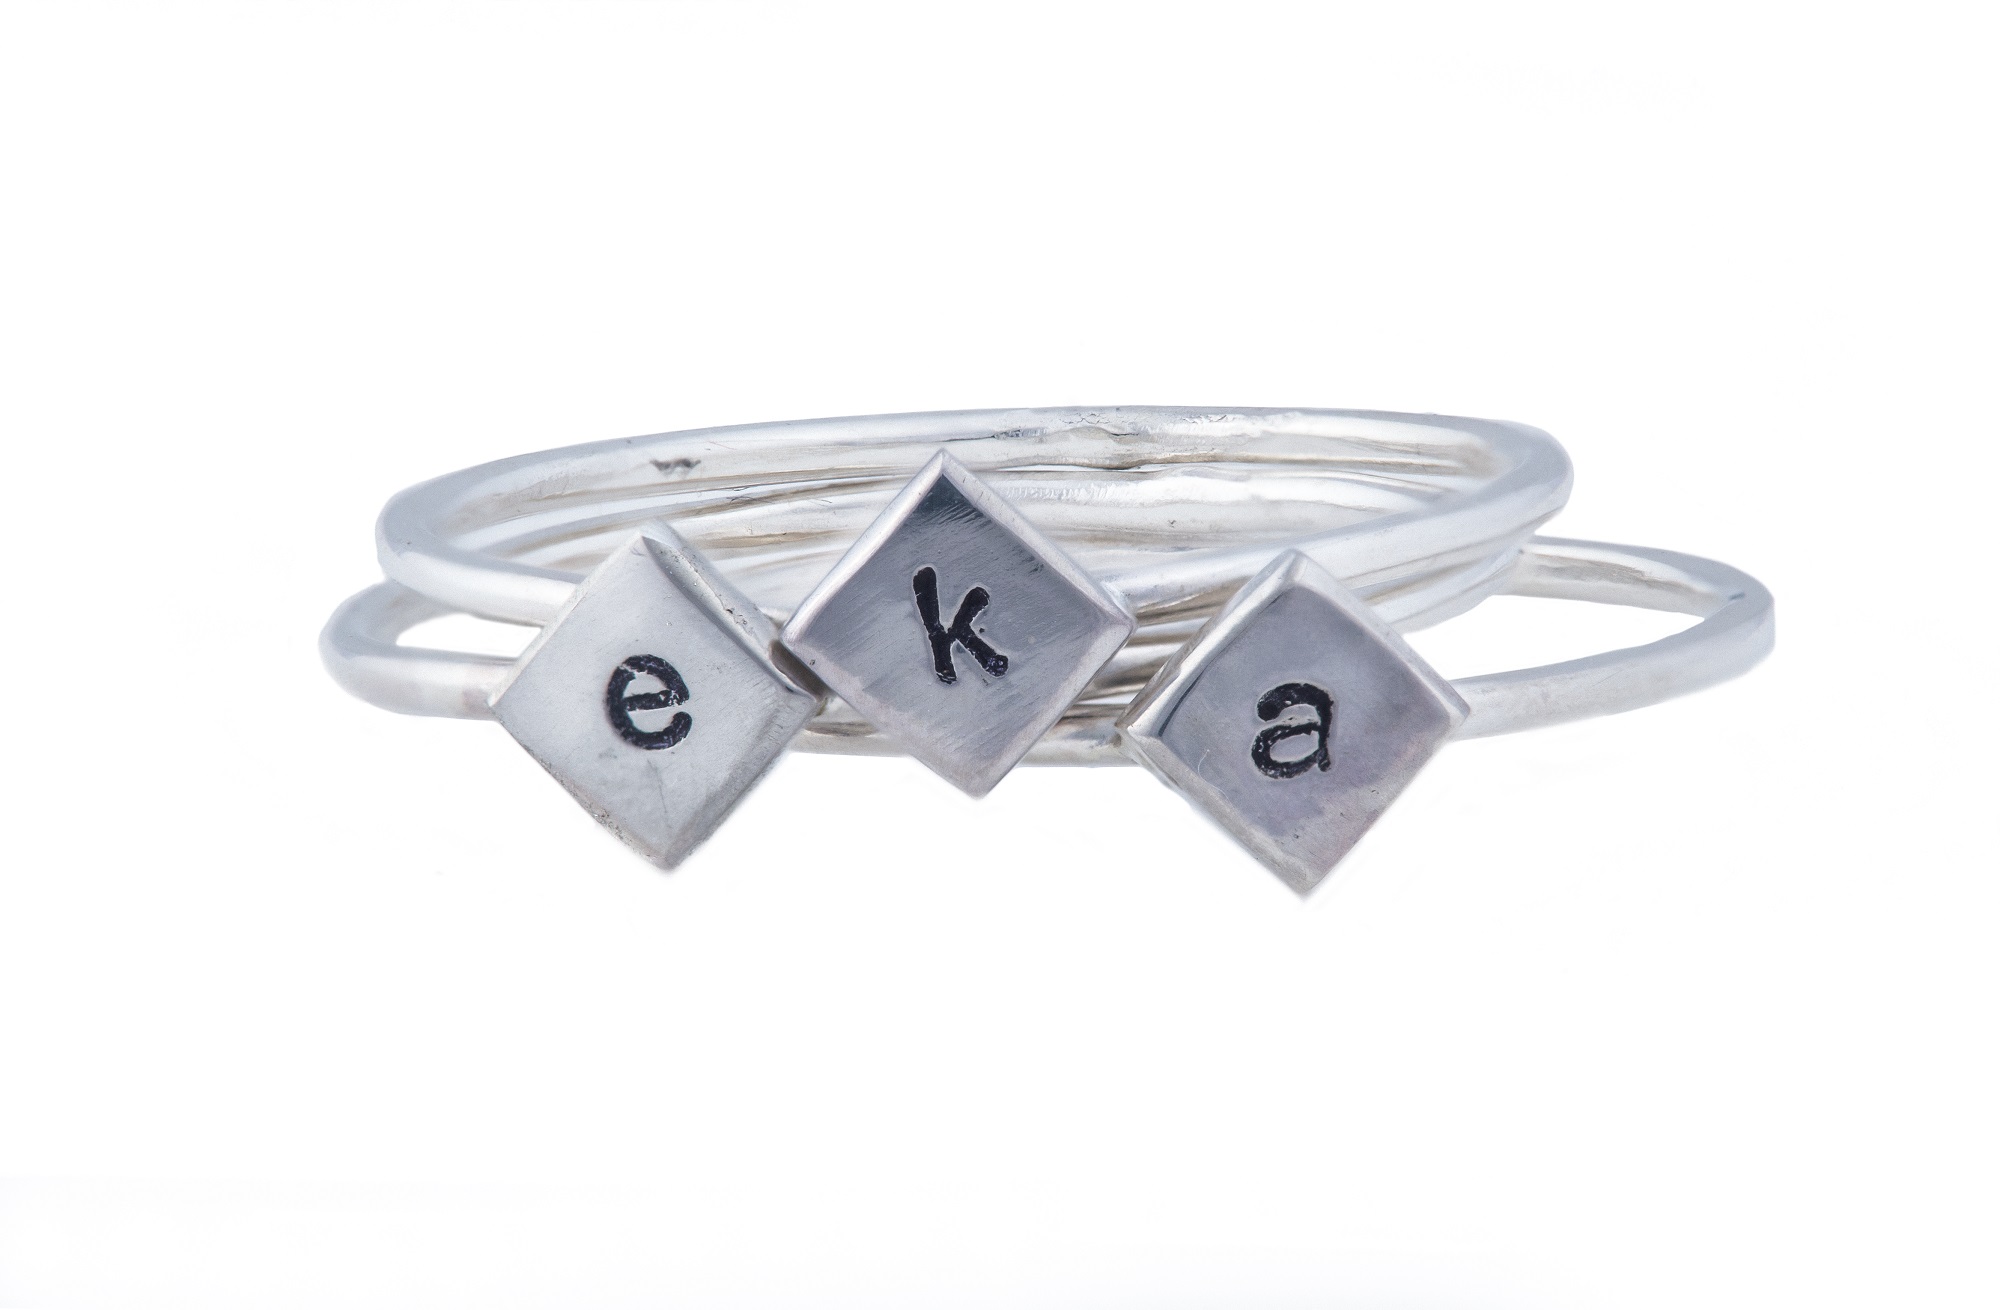 Sora Tuki Initial Ring Silver Letter Rings for Women Open Adjustable Rings  Chunky Initial Ring Bold Statement Rings Chic Jewelry (B) : Amazon.com.au:  Clothing, Shoes & Accessories